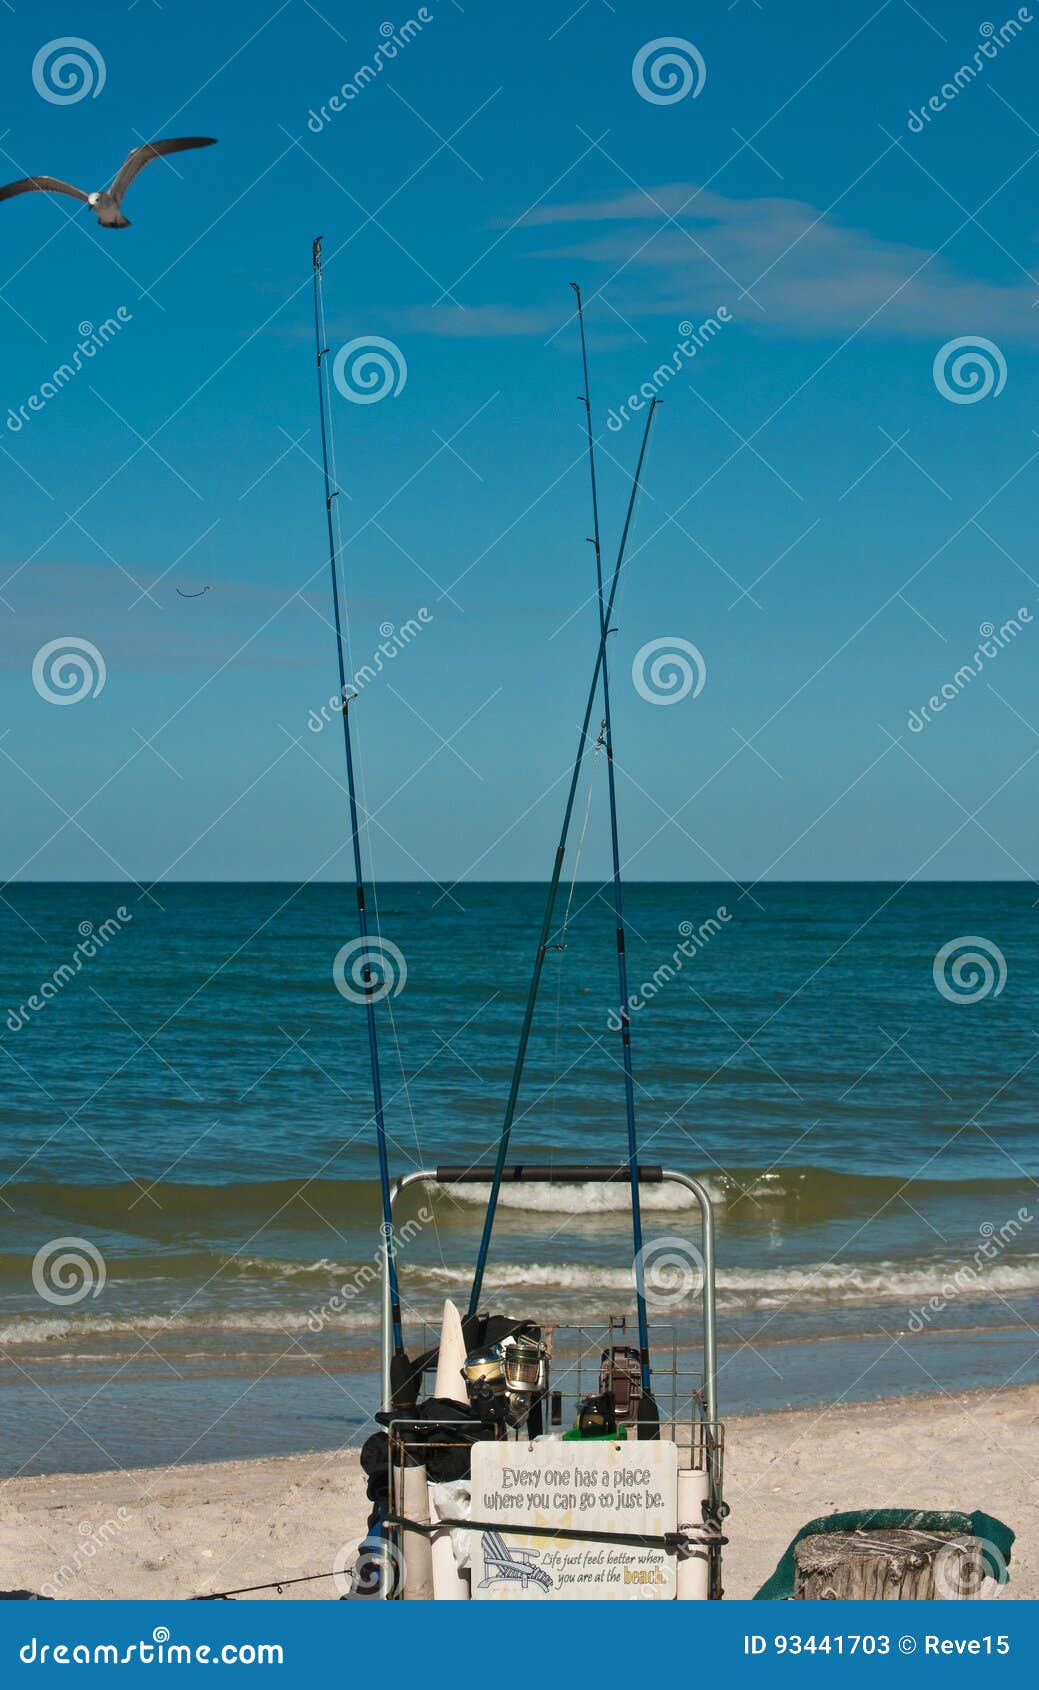 https://thumbs.dreamstime.com/z/fishing-tackle-cart-beach-gulf-mexico-sunny-tropical-day-preparing-to-surf-fish-seagull-watching-93441703.jpg